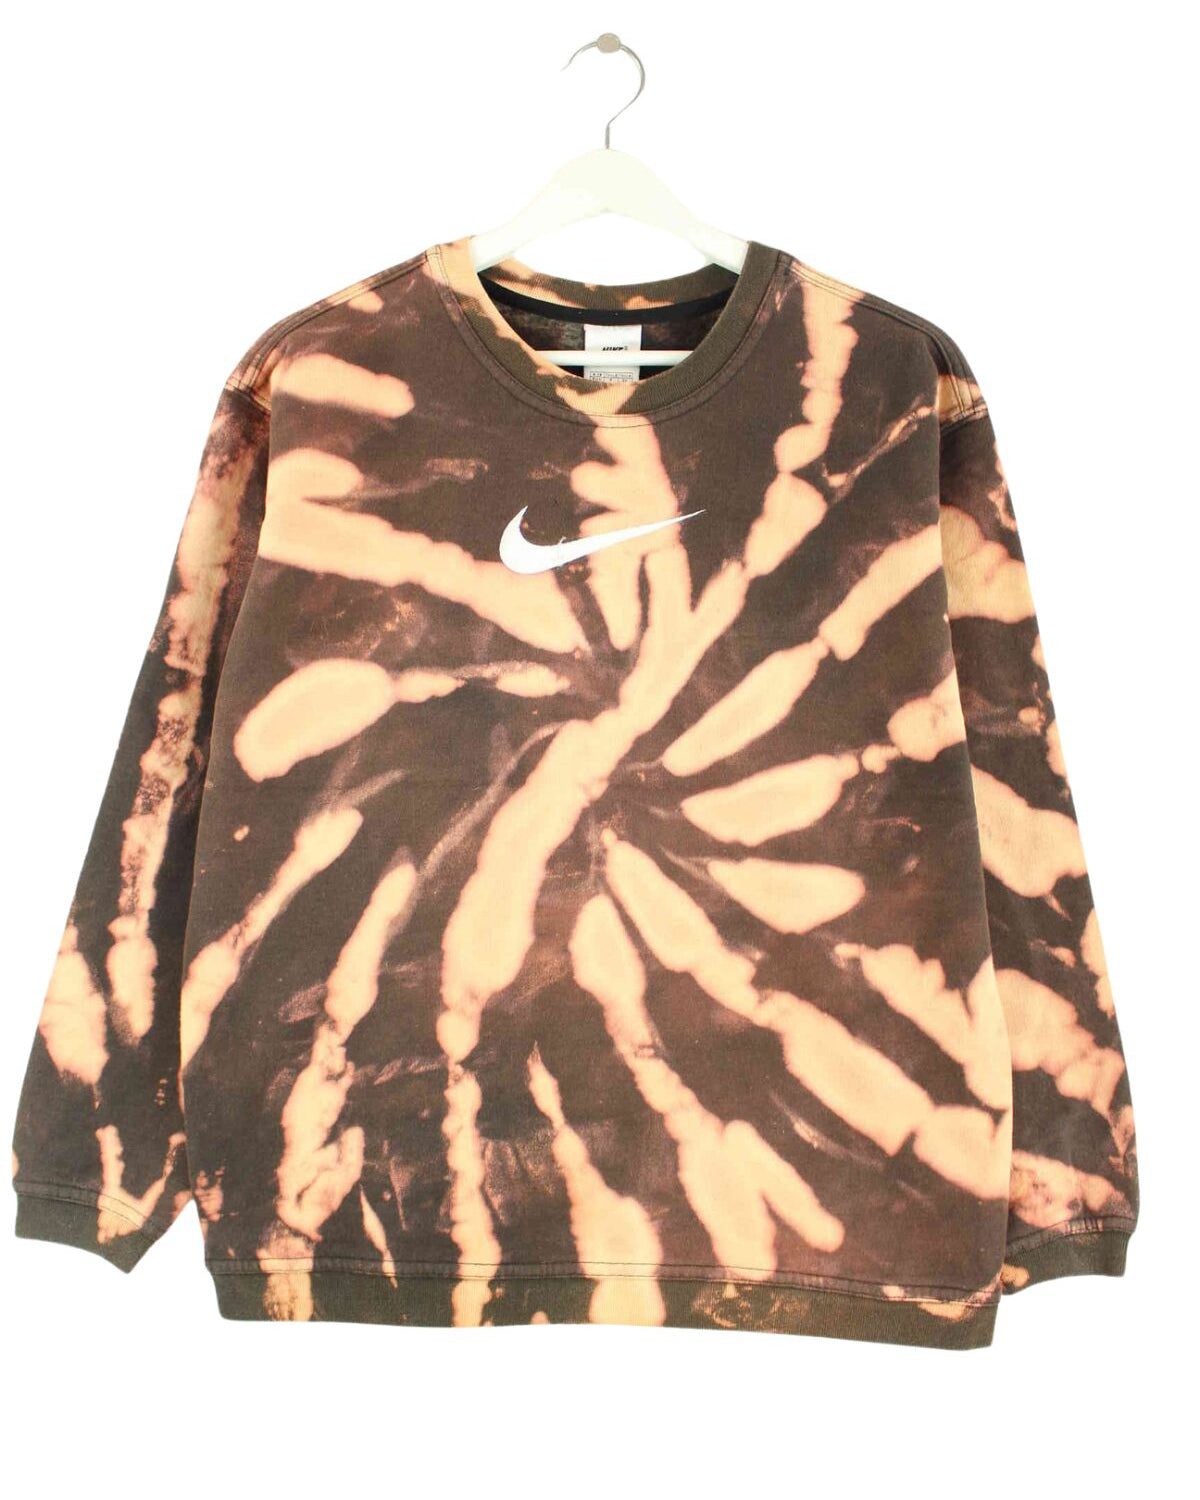 Nike 90s Vintage Big Swoosh Embroidered Tie Dye Sweater Braun S (front image)